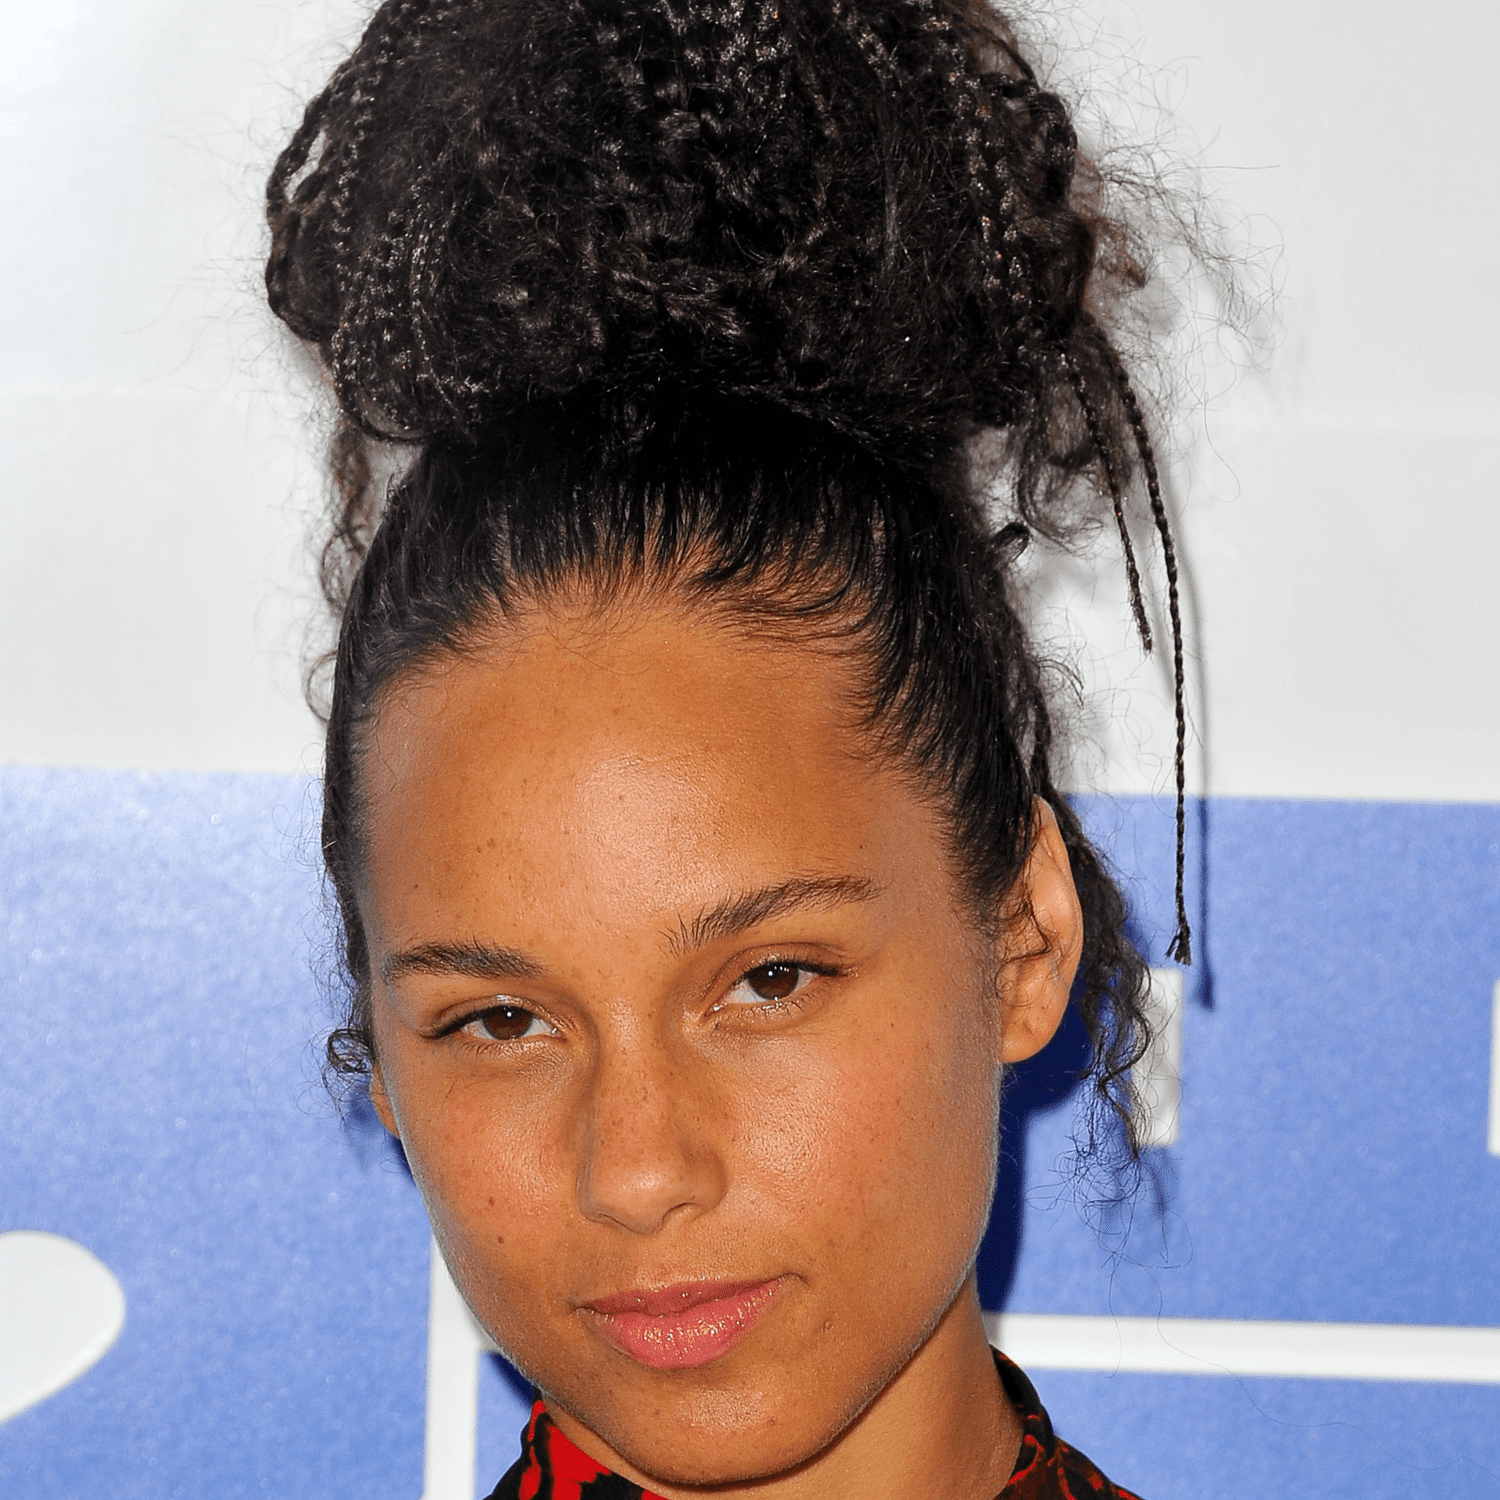 Alicia keys wearing topknot hairstyle on curly hair 